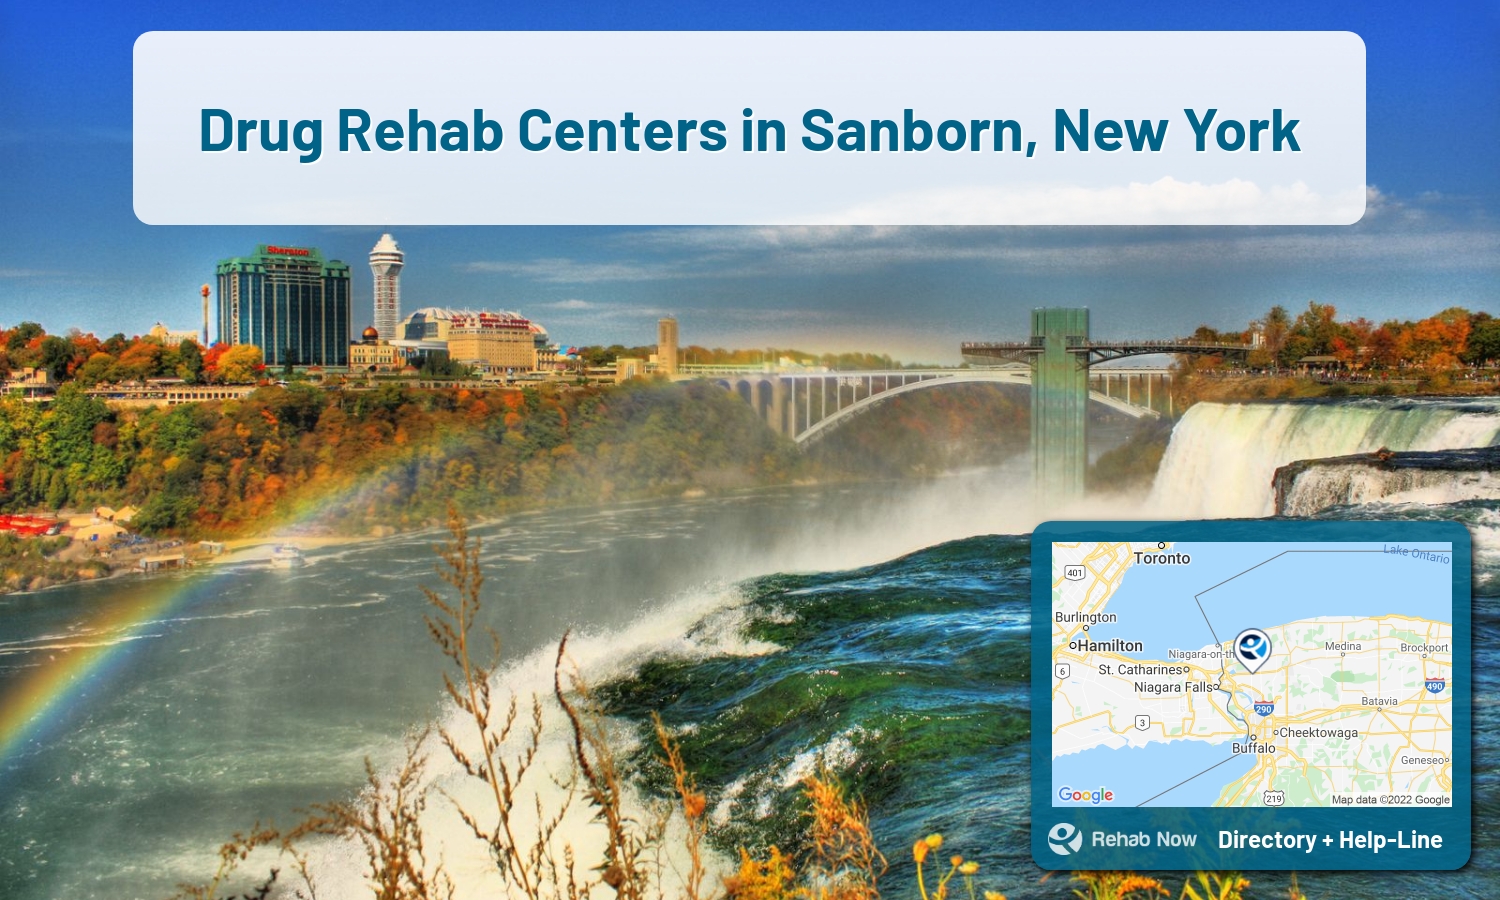 Our experts can help you find treatment now in Sanborn, New York. We list drug rehab and alcohol centers in New York.